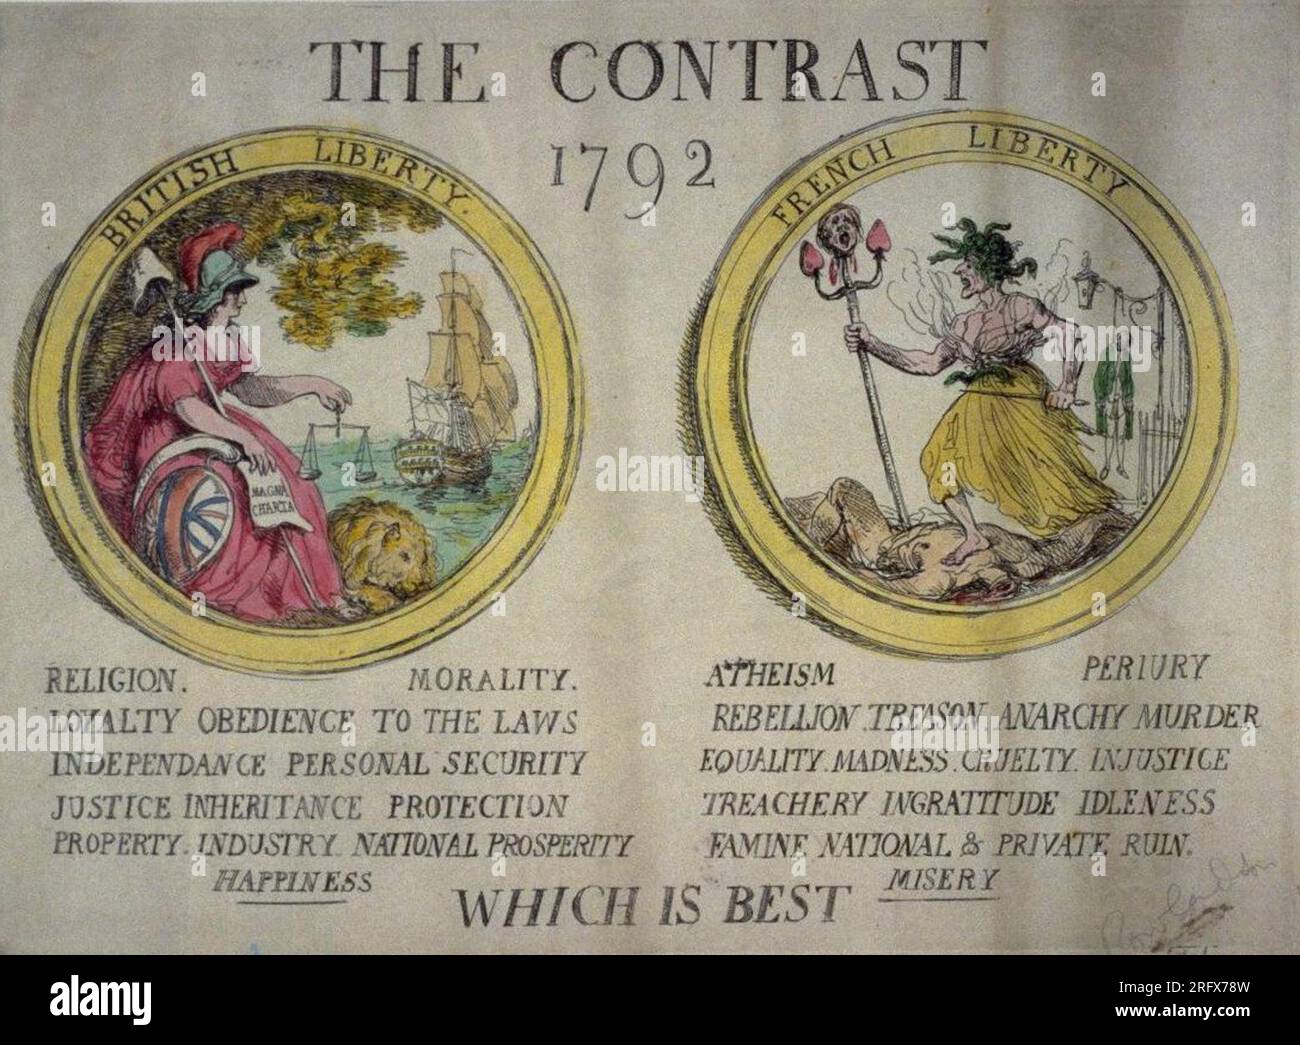 Contrast - 1792 - Which Is Best? 1792 by Thomas Rowlandson Stock Photo